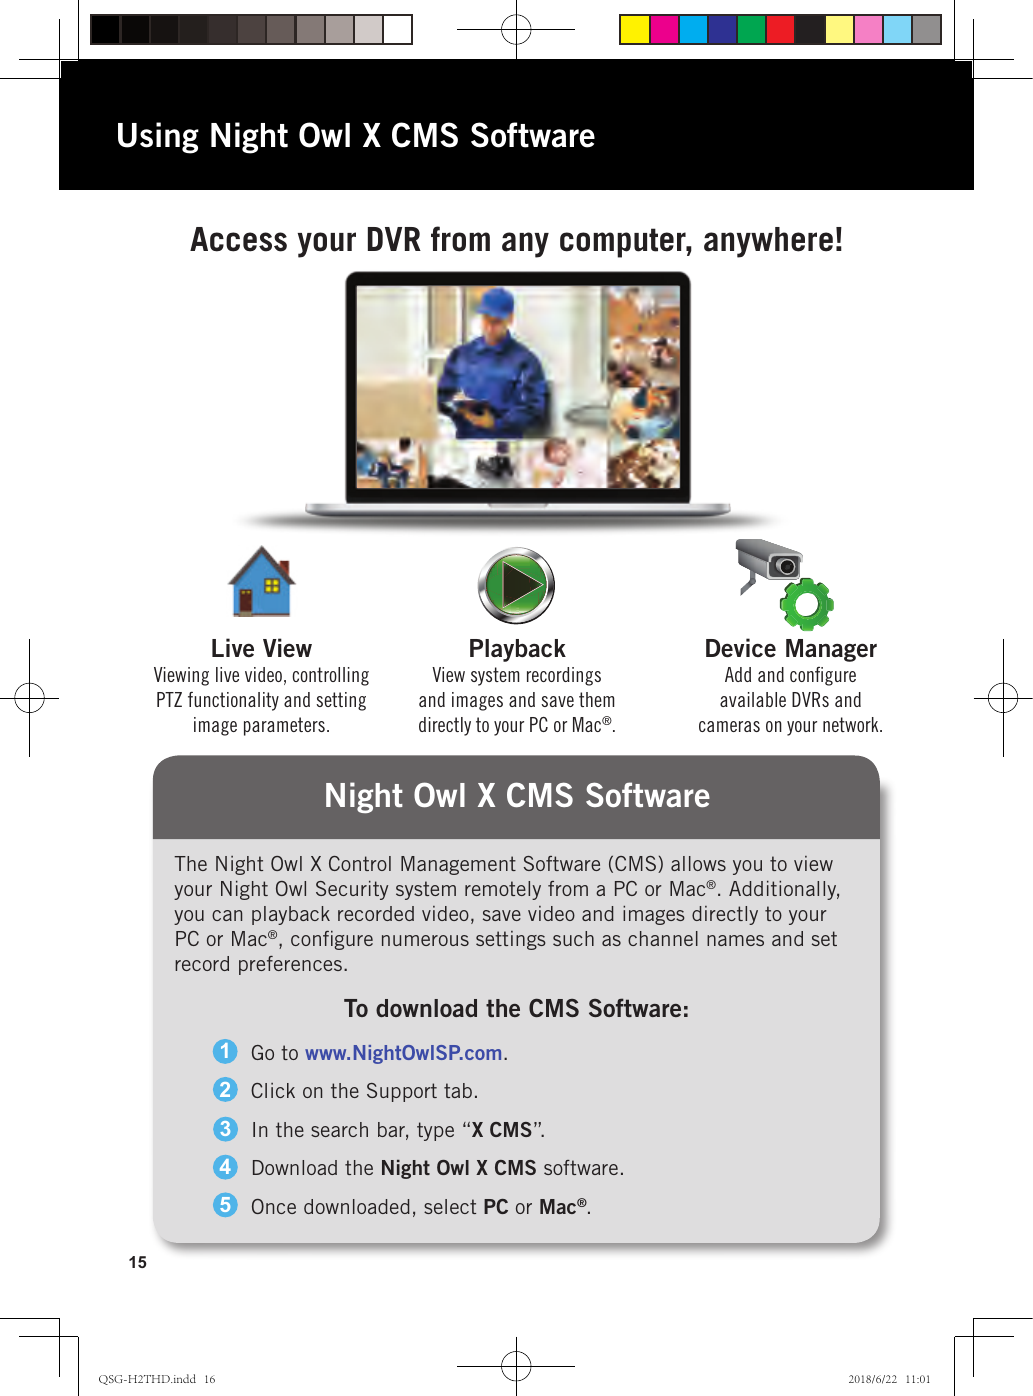 15Night Owl X CMS SoftwareAccess your DVR from any computer, anywhere!Device ManagerAdd and conﬁgure available DVRs and cameras on your network.PlaybackView system recordings and images and save them directly to your PC or Mac®.Live ViewViewing live video, controlling PTZ functionality and setting image parameters.Using Night Owl X CMS SoftwareThe Night Owl X Control Management Software (CMS) allows you to view your Night Owl Security system remotely from a PC or Mac®. Additionally, you can playback recorded video, save video and images directly to your PC or Mac®, conﬁgure numerous settings such as channel names and set record preferences.Go to www.NightOwlSP.com.Click on the Support tab.In the search bar, type “X CMS”.Download the Night Owl X CMS software.Once downloaded, select PC or Mac®.12345To download the CMS Software:QSG-H2THD.indd   16 2018/6/22   11:01